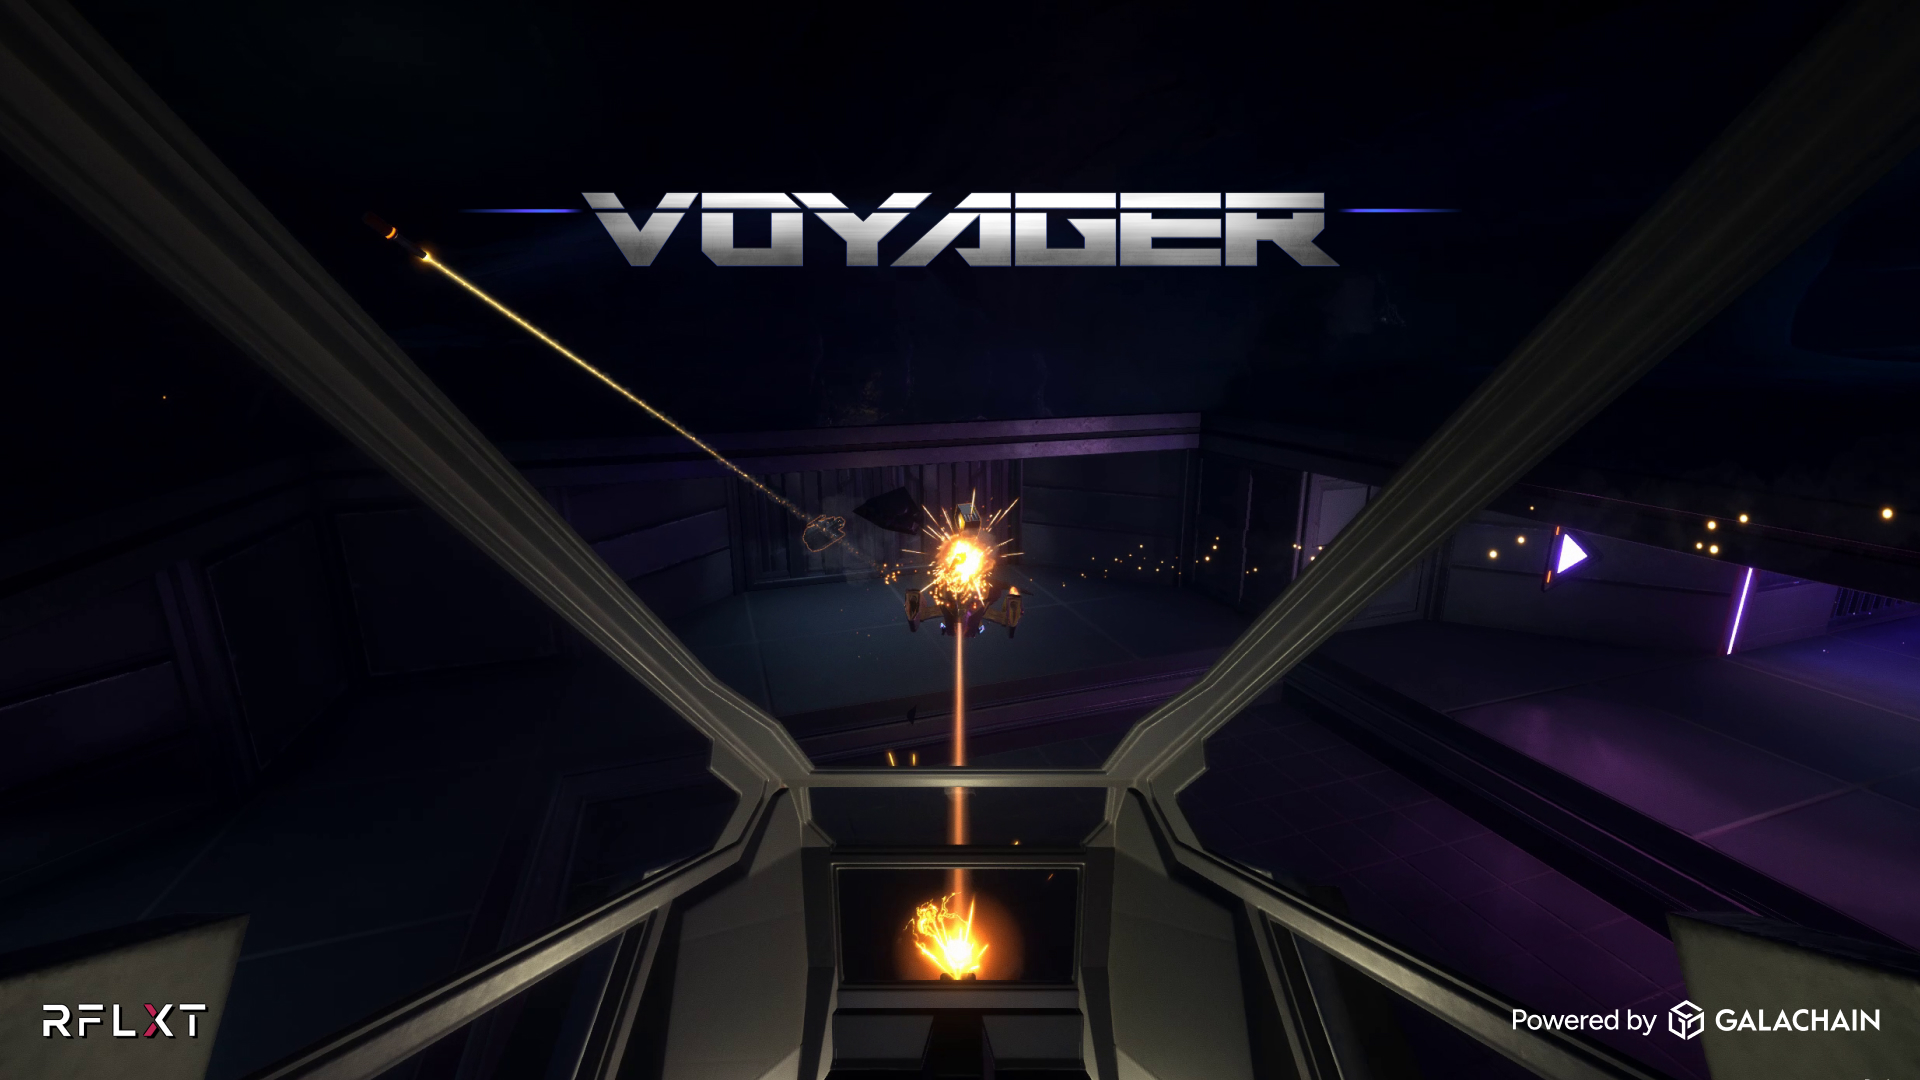 Voyager is an upcoming gaming title powered by GalaChain and created by RFLXT